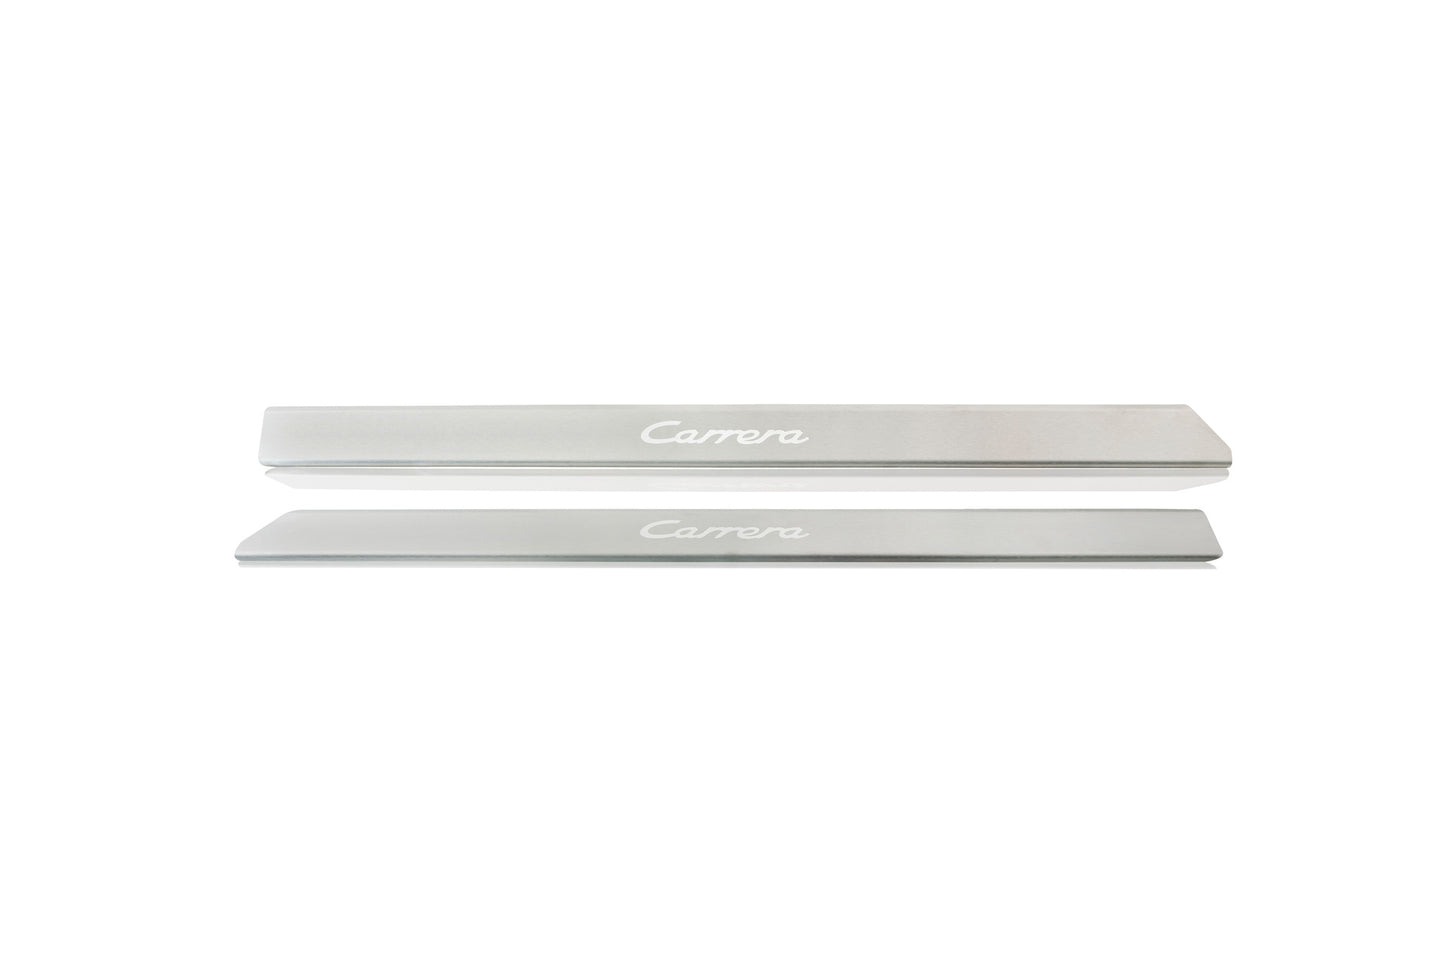 Door-sill guard with “Carrera” lettering, stainless steel